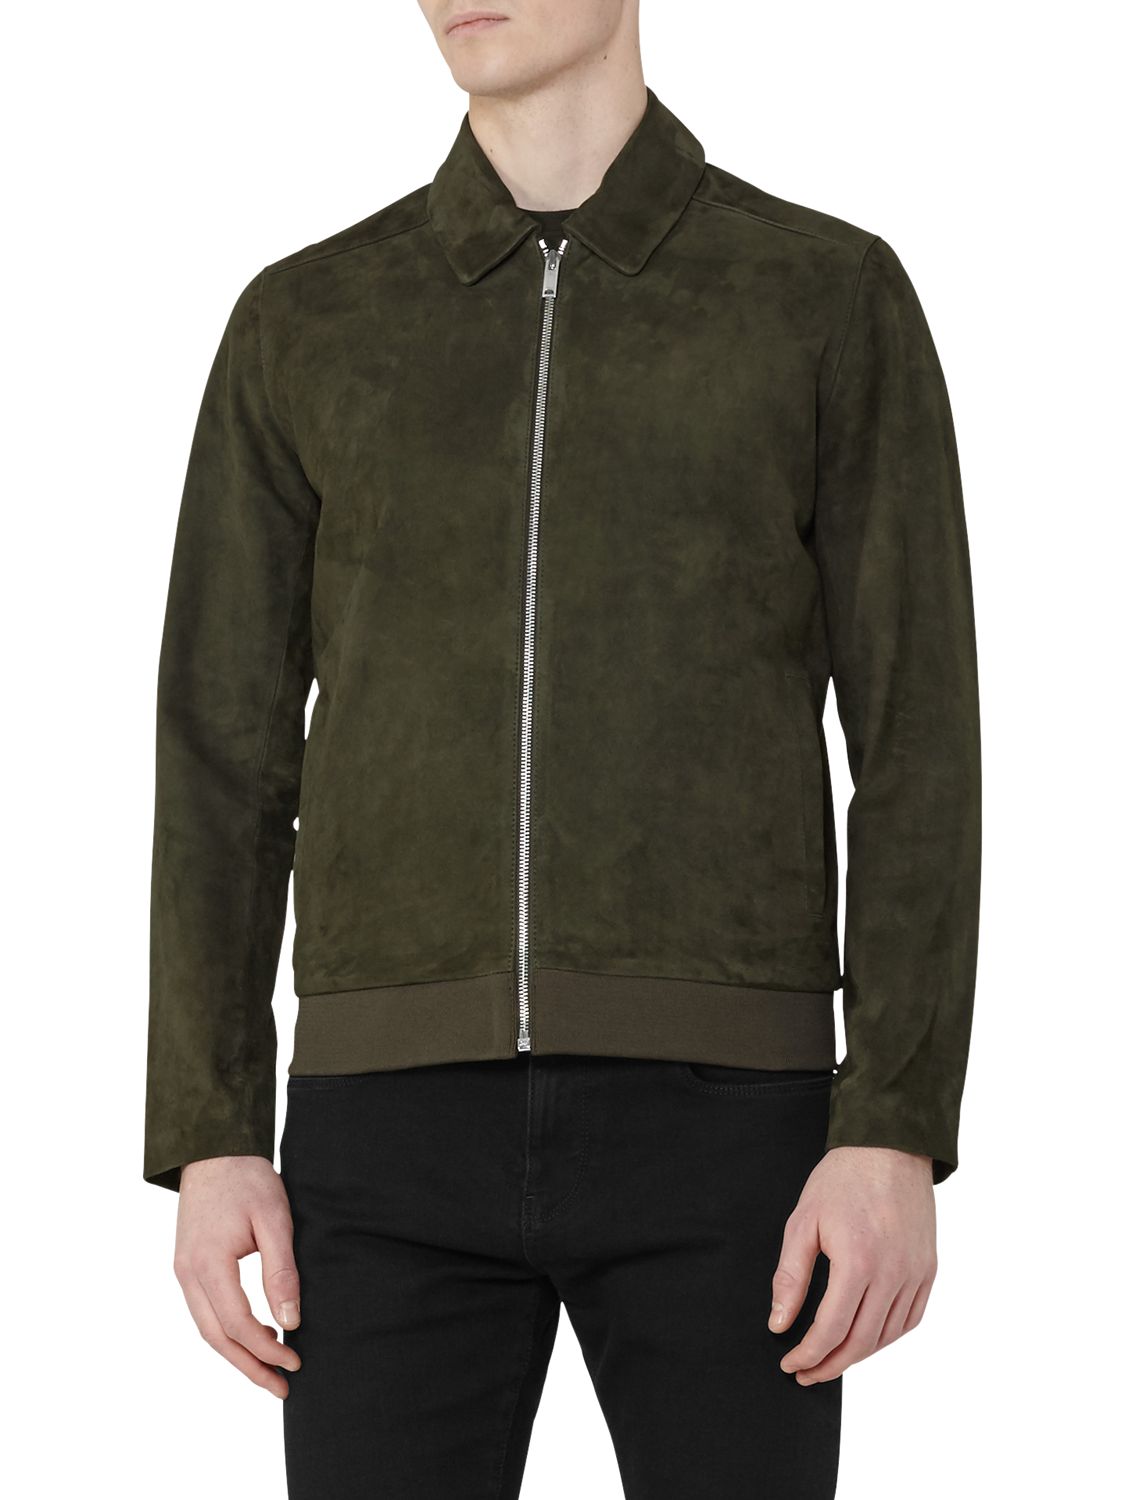 Reiss Holt Suede Bomber Jacket, Green at John Lewis & Partners